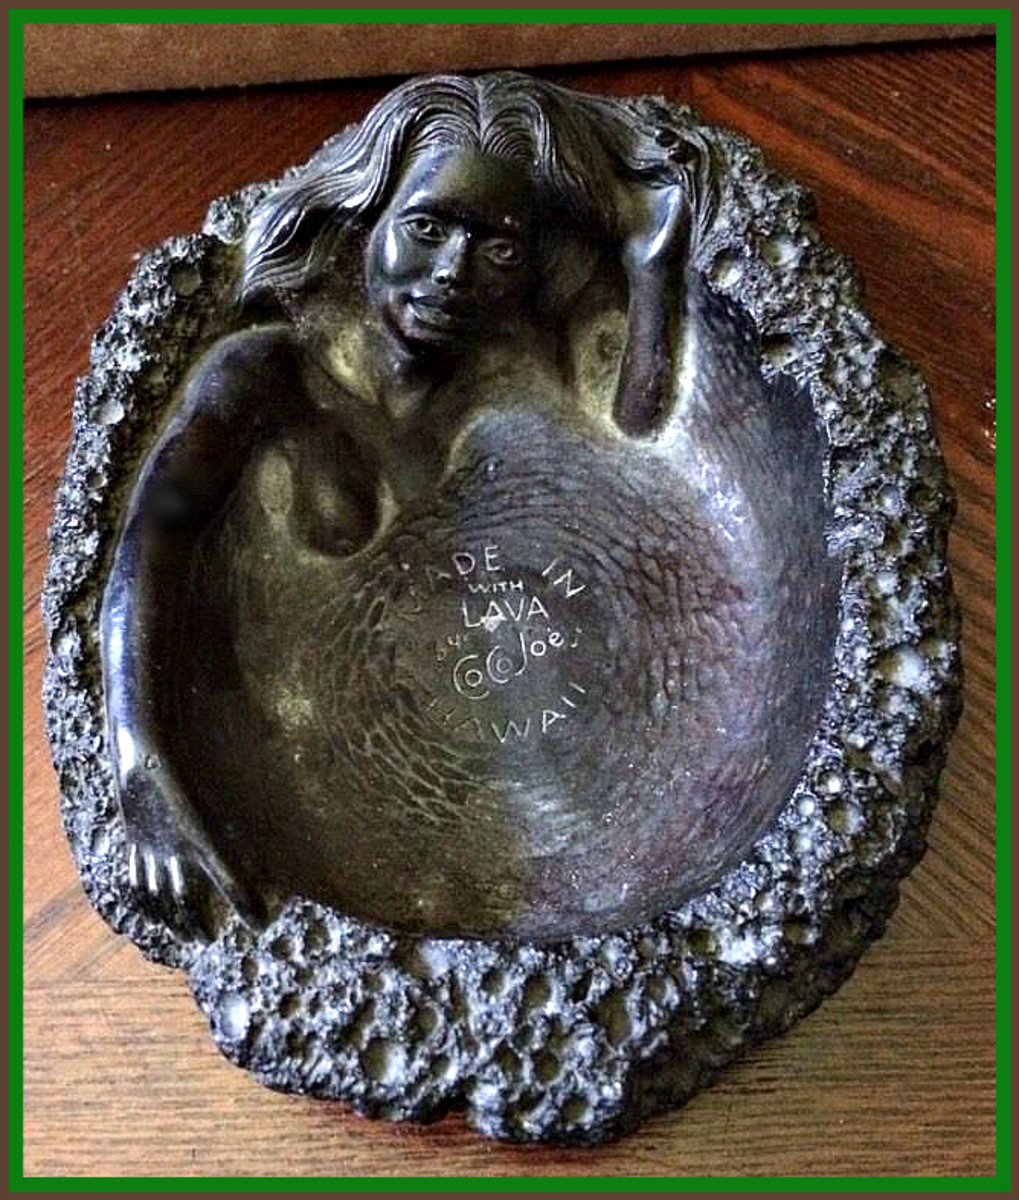 Lovely and rather large ashtray of woman made with lava by Coco Joe back in 1964 from the lava of the Hawaiian islands. 